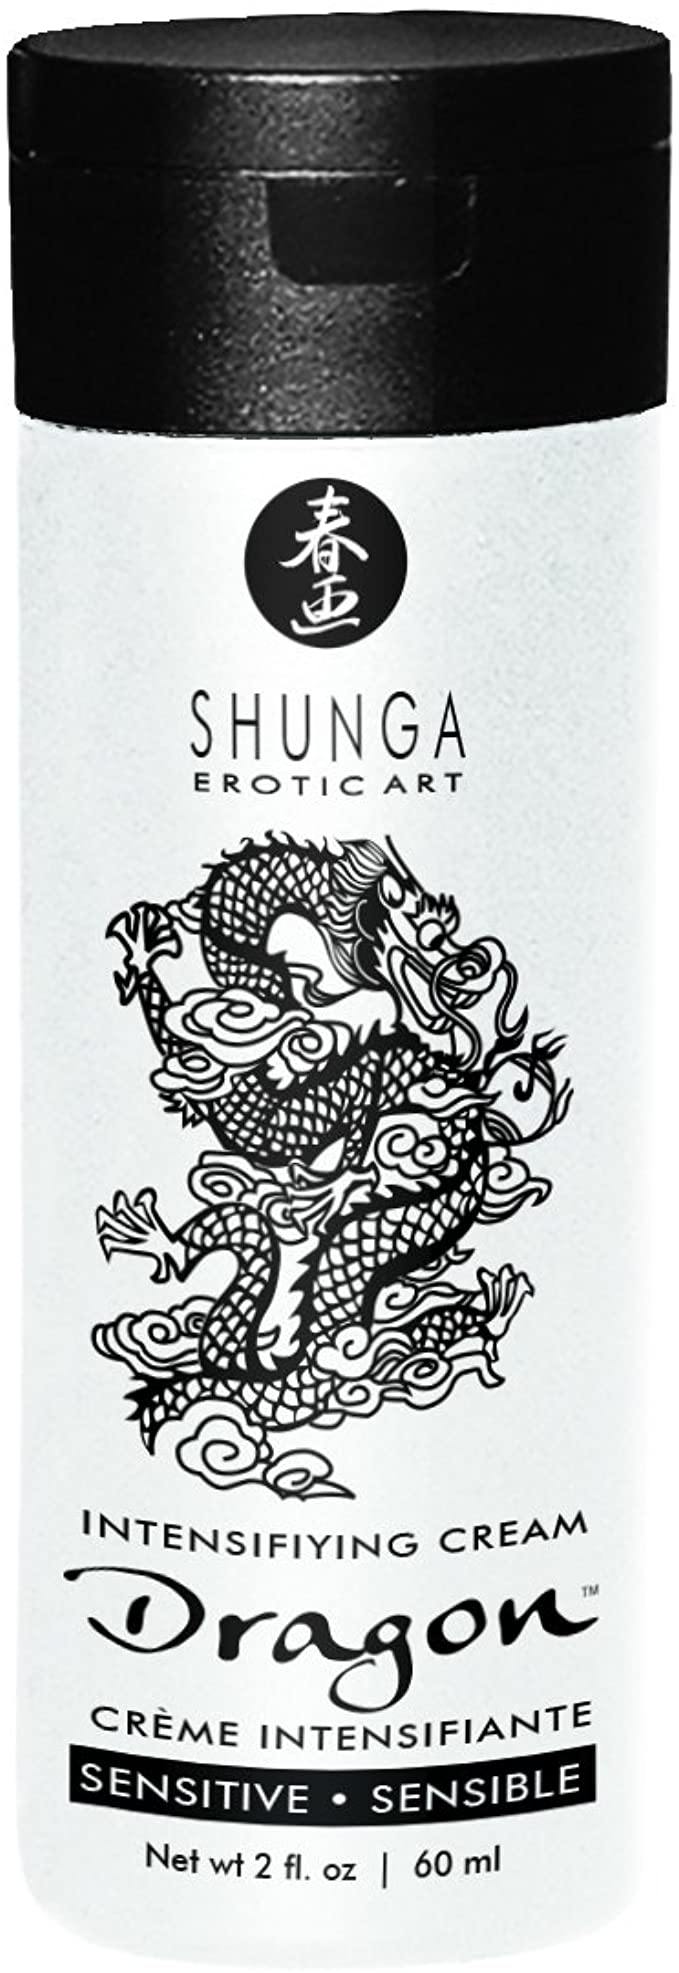 Shunga - Carnal Pleasures Collection by Shunga - with Curbside Pickup options - Boink Adult Boutique www.boinkmuskoka.com